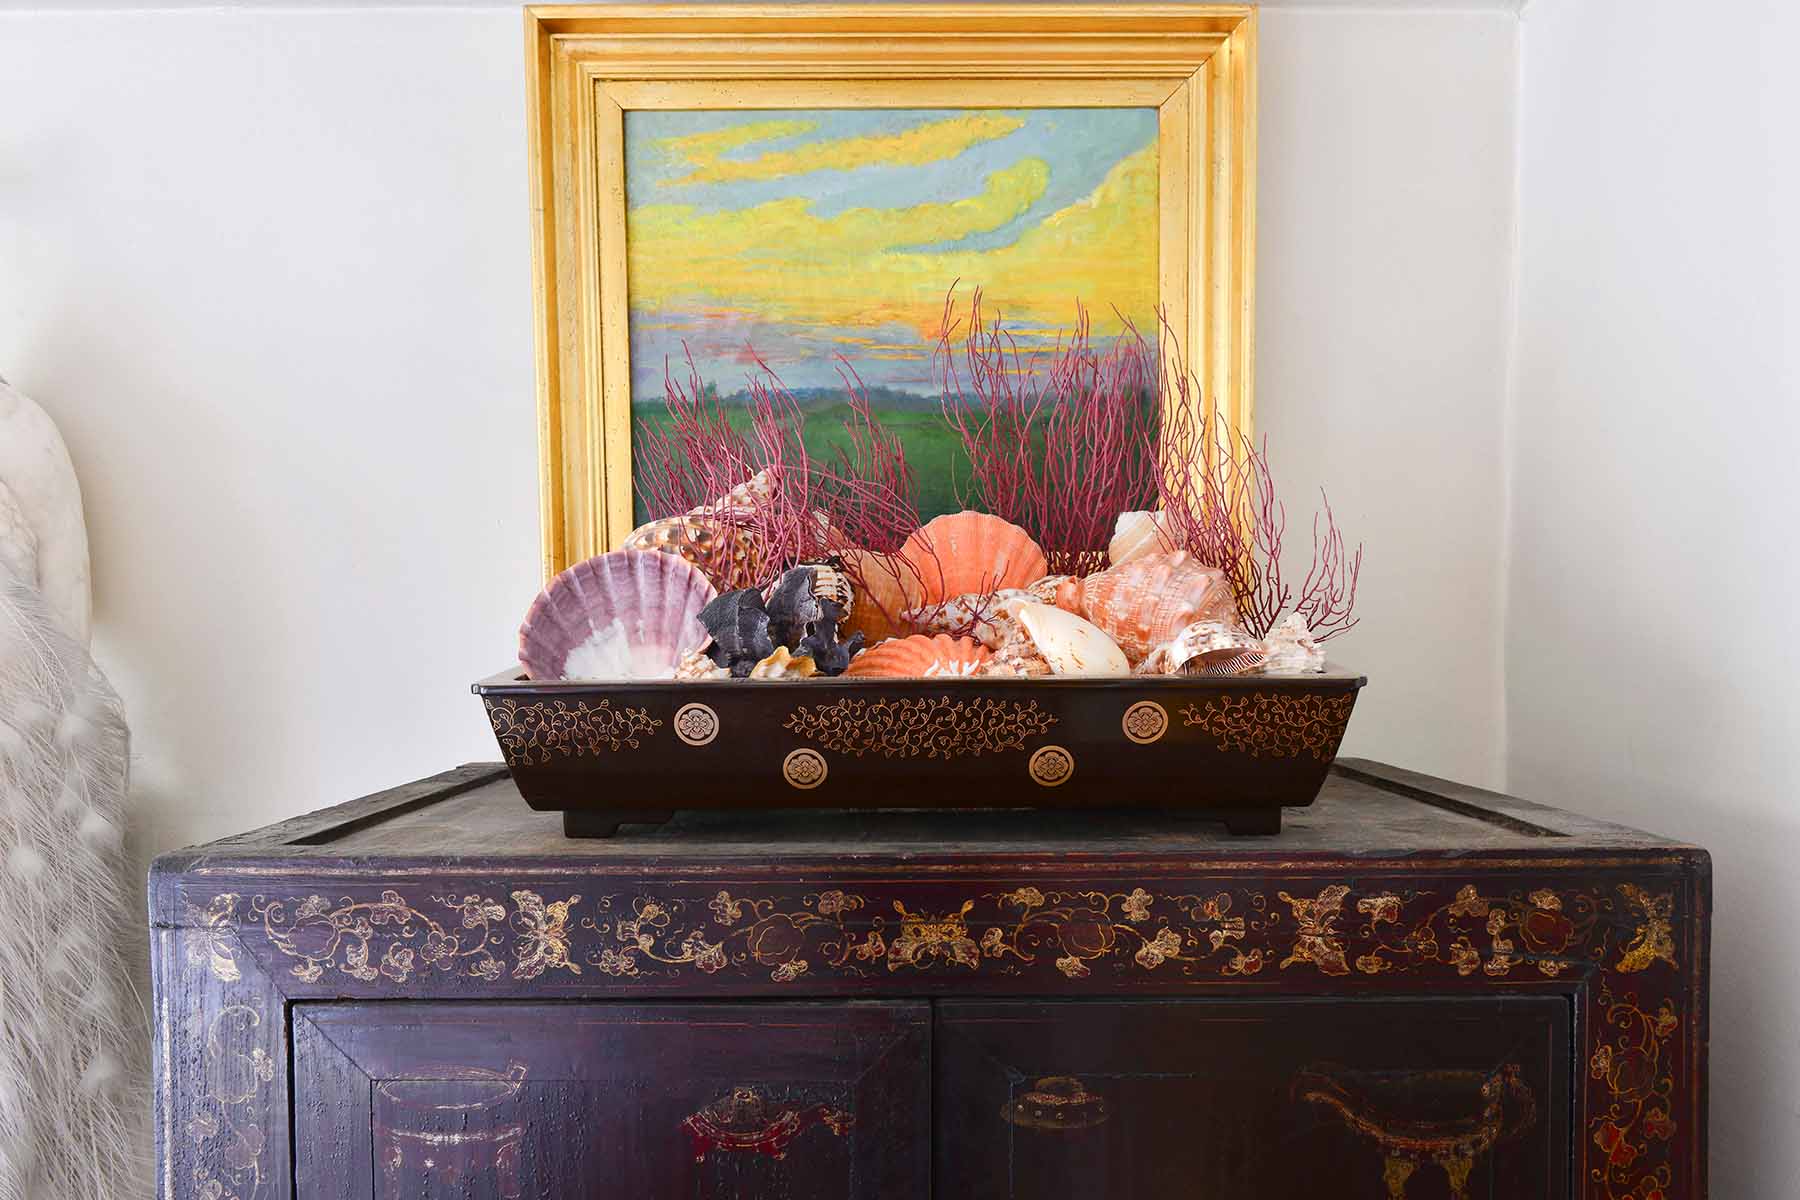 Vintage cabinet with asian bowl of shells and seascape painting